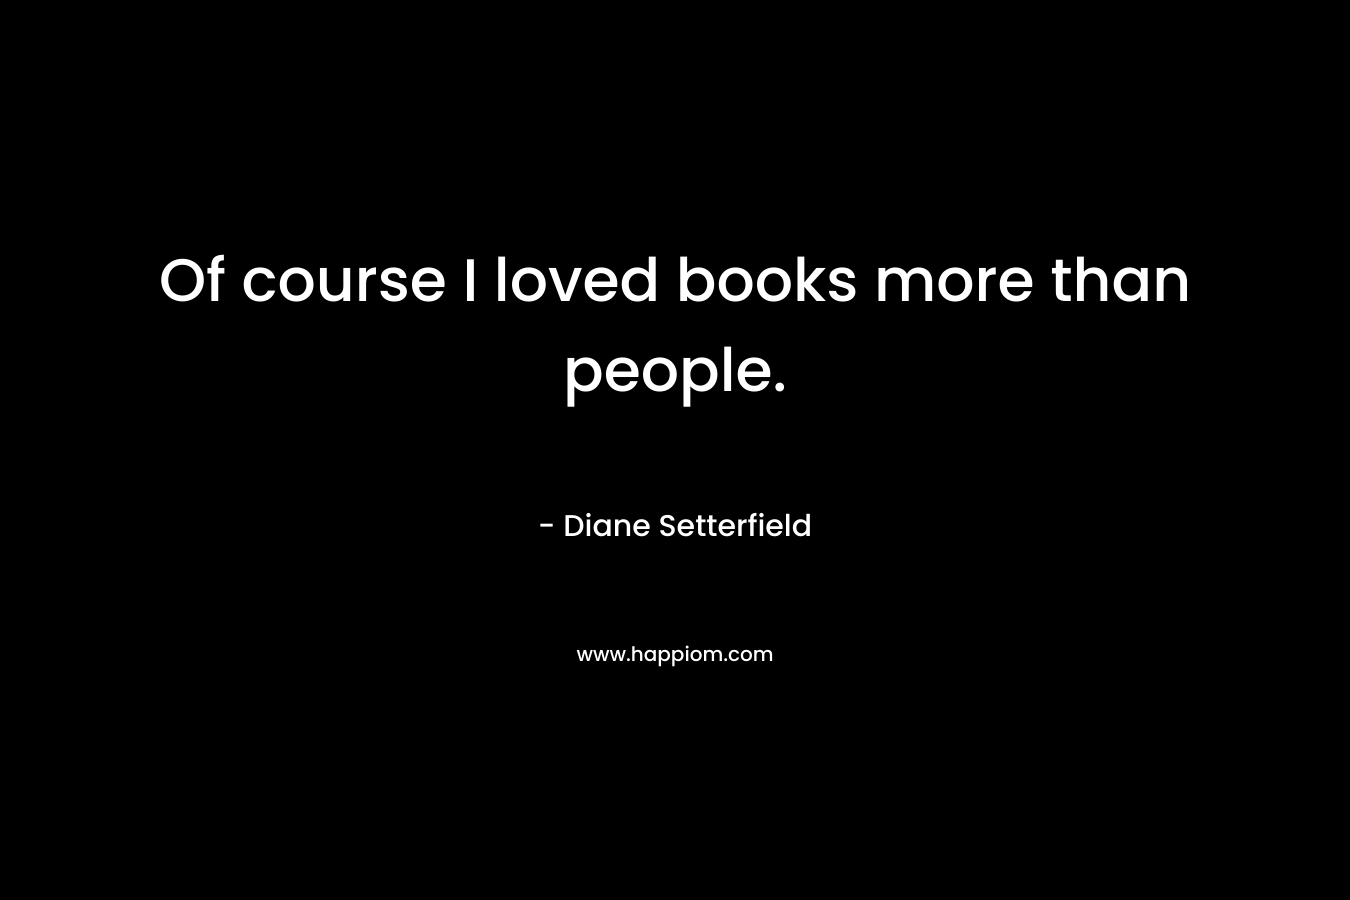 Of course I loved books more than people.